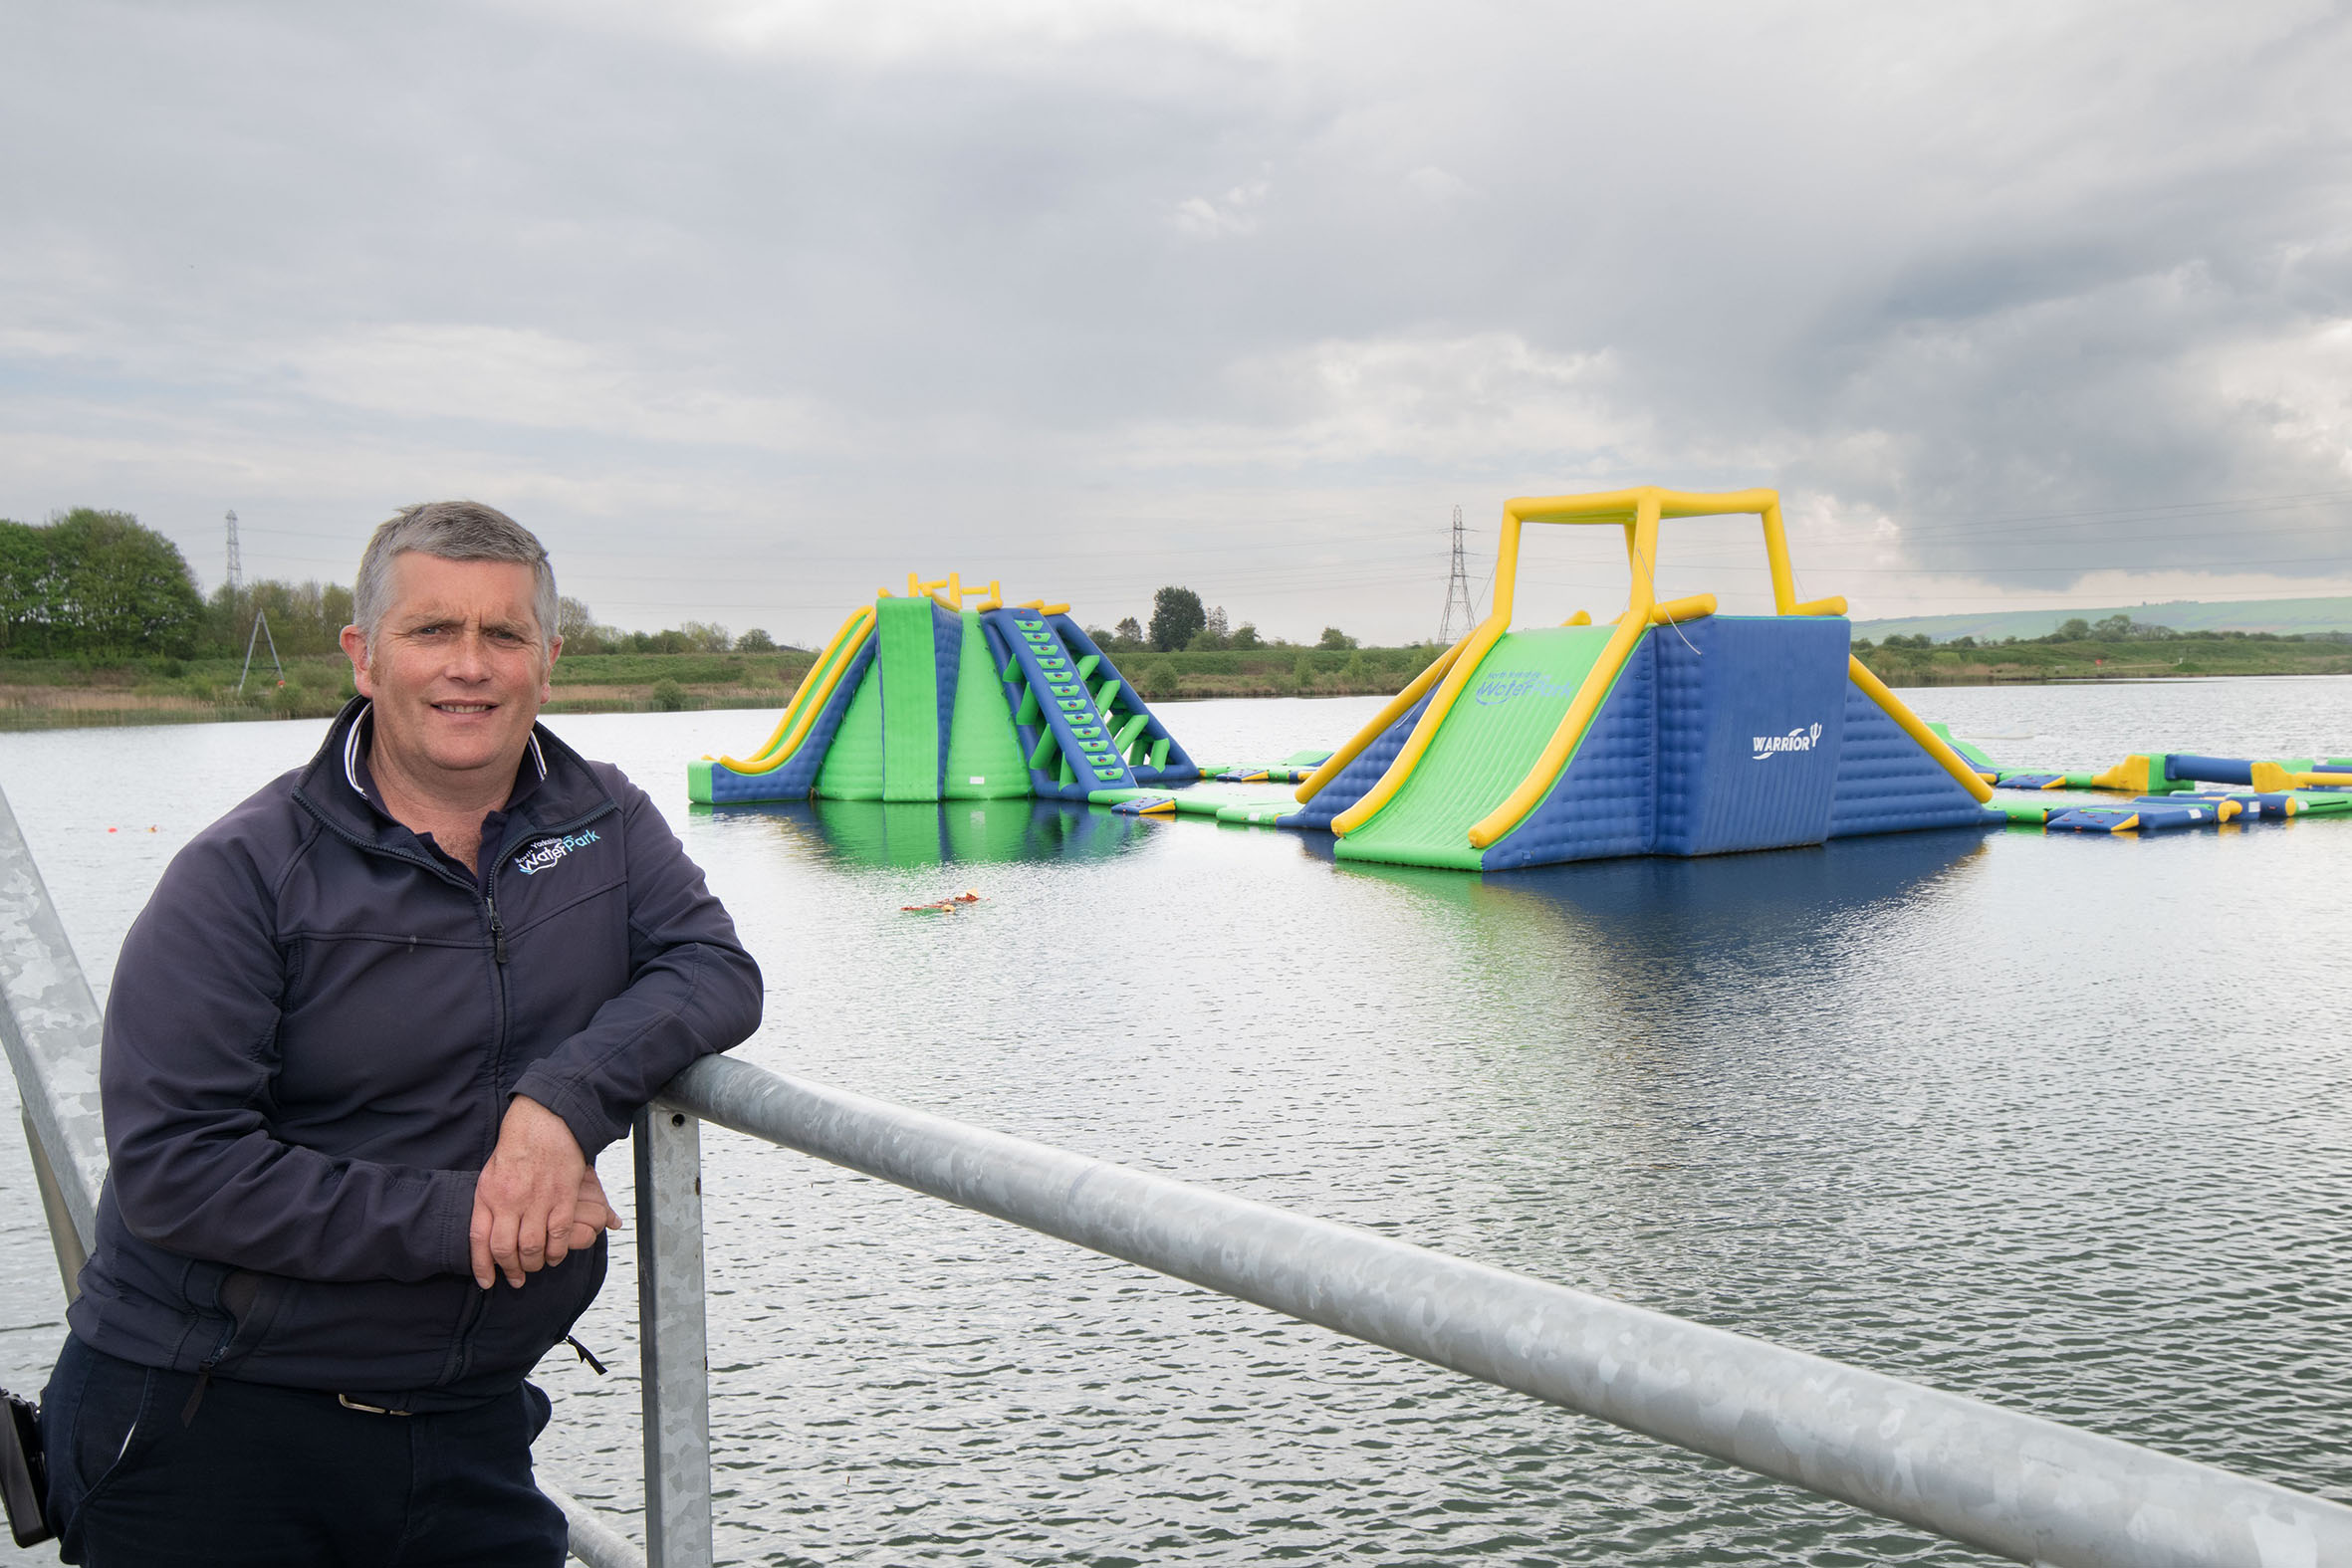 The North Yorkshire Water Park’s general manager, Gareth Davies, with inflatables from the attraction in the background